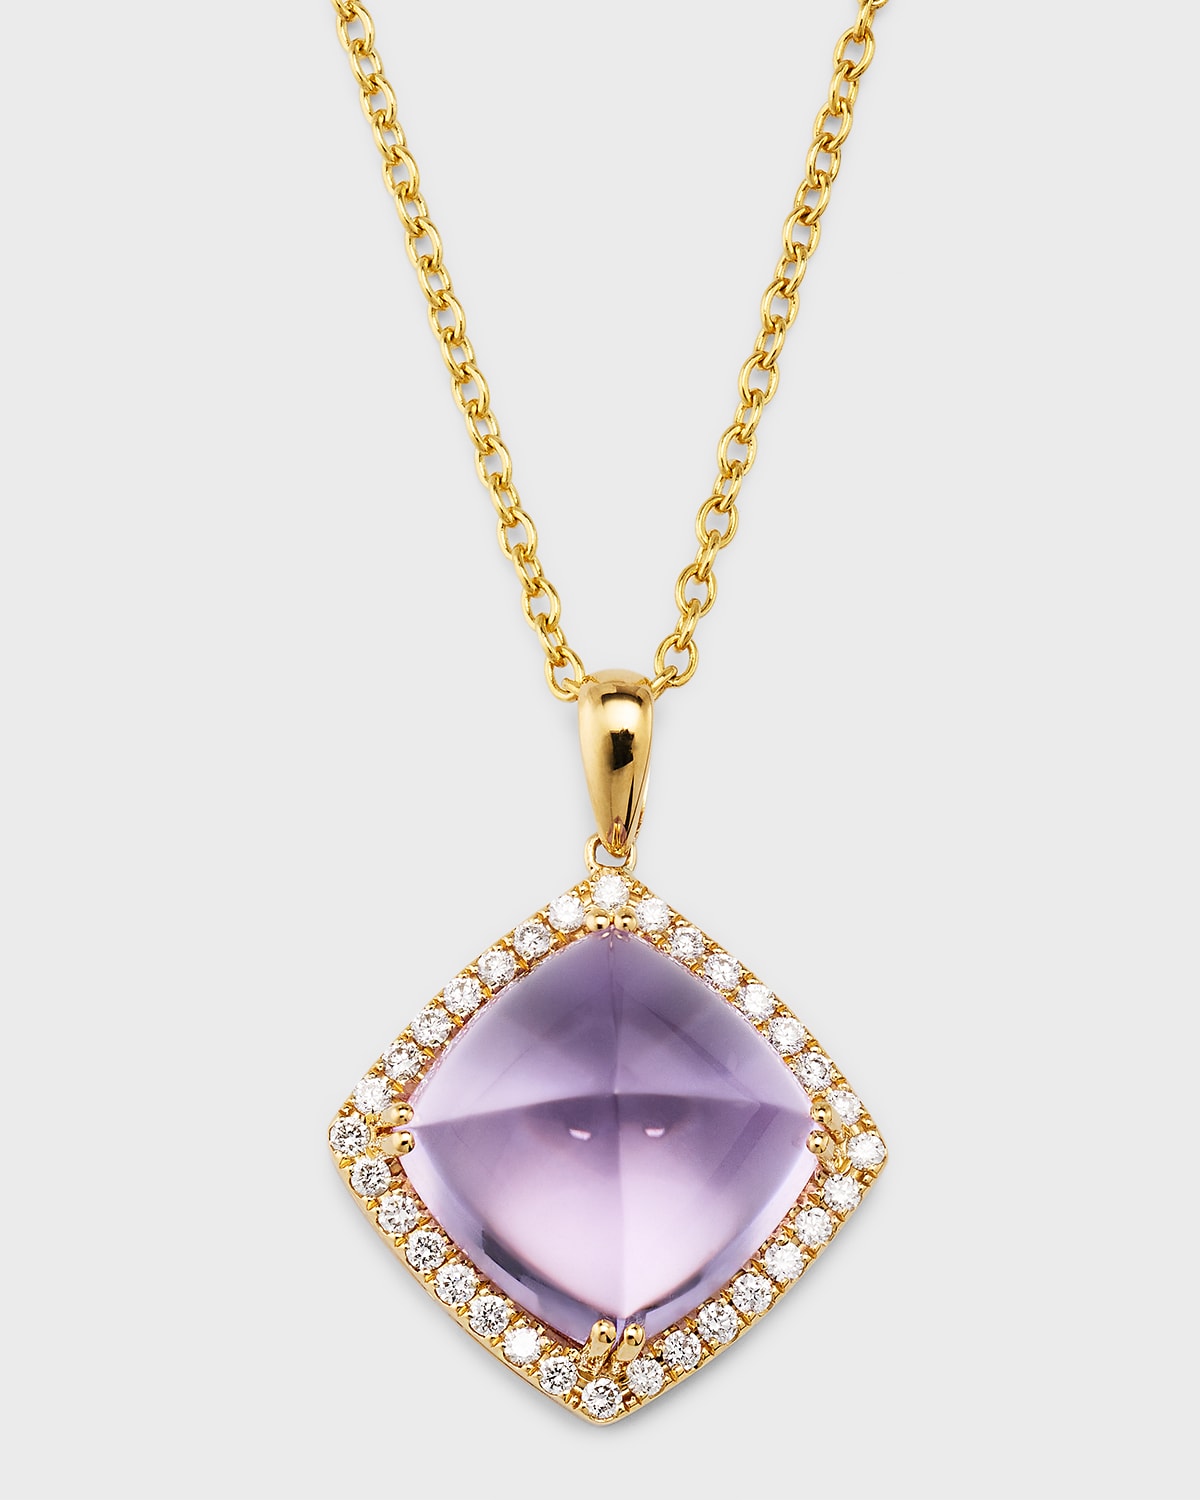 18K Yellow Gold Pendant with Amethyst and Diamonds